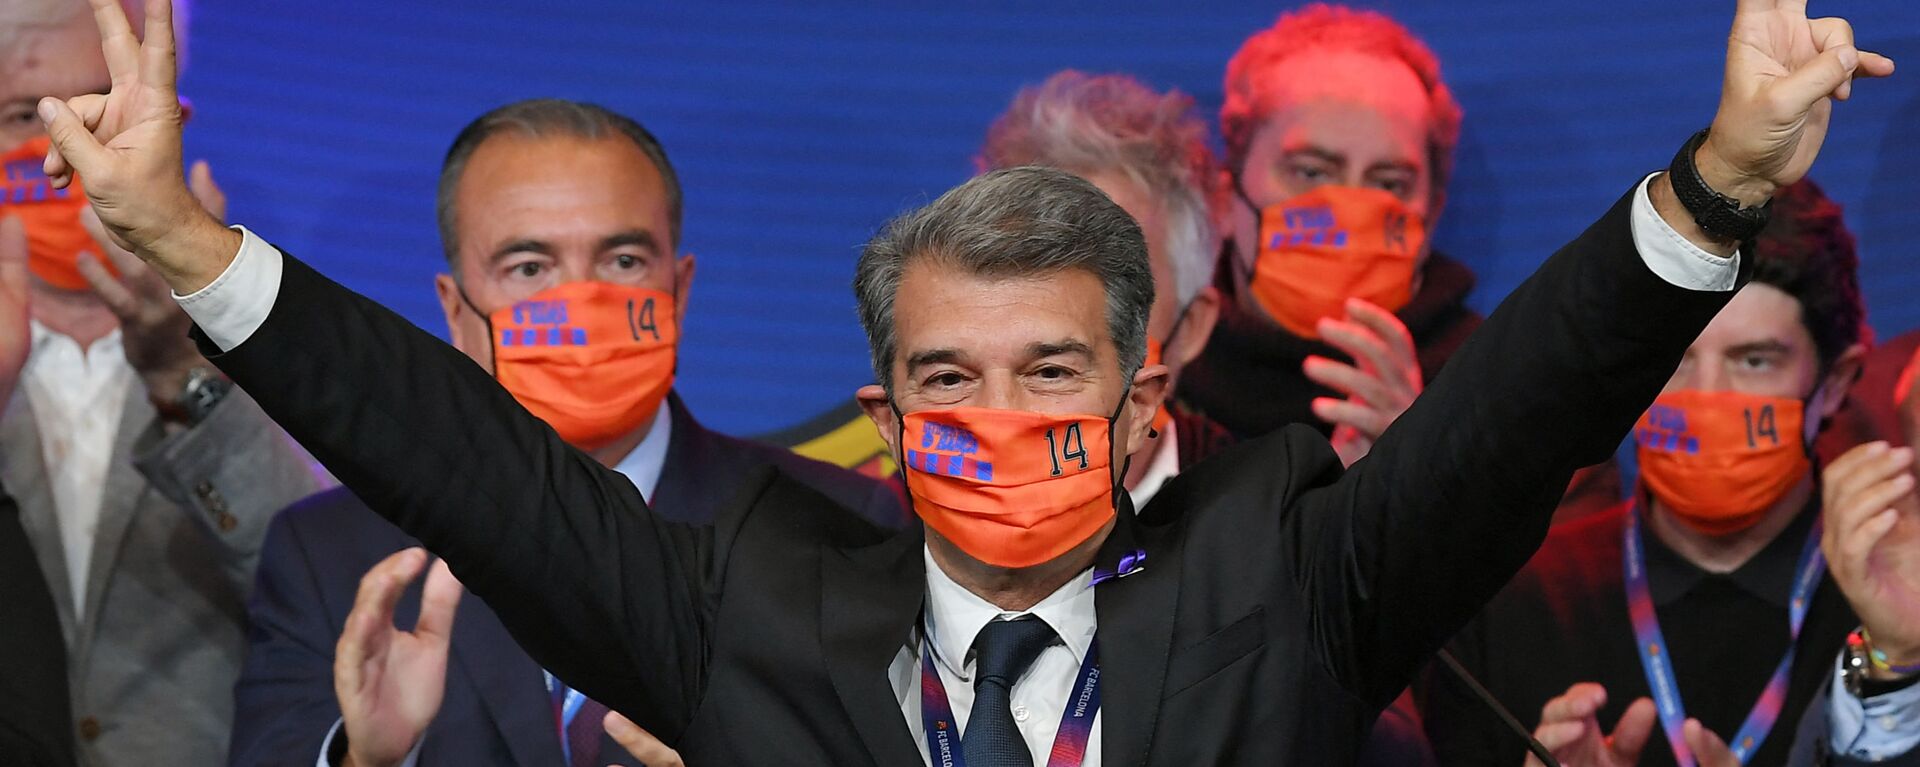 Spanish lawyer Joan Laporta celebrates his victory at the auditorium of the Camp Nou complex after winning the election for the FC Barcelona presidency on March 7, 2021 in Barcelona. - اسپوتنیک افغانستان  , 1920, 01.09.2021